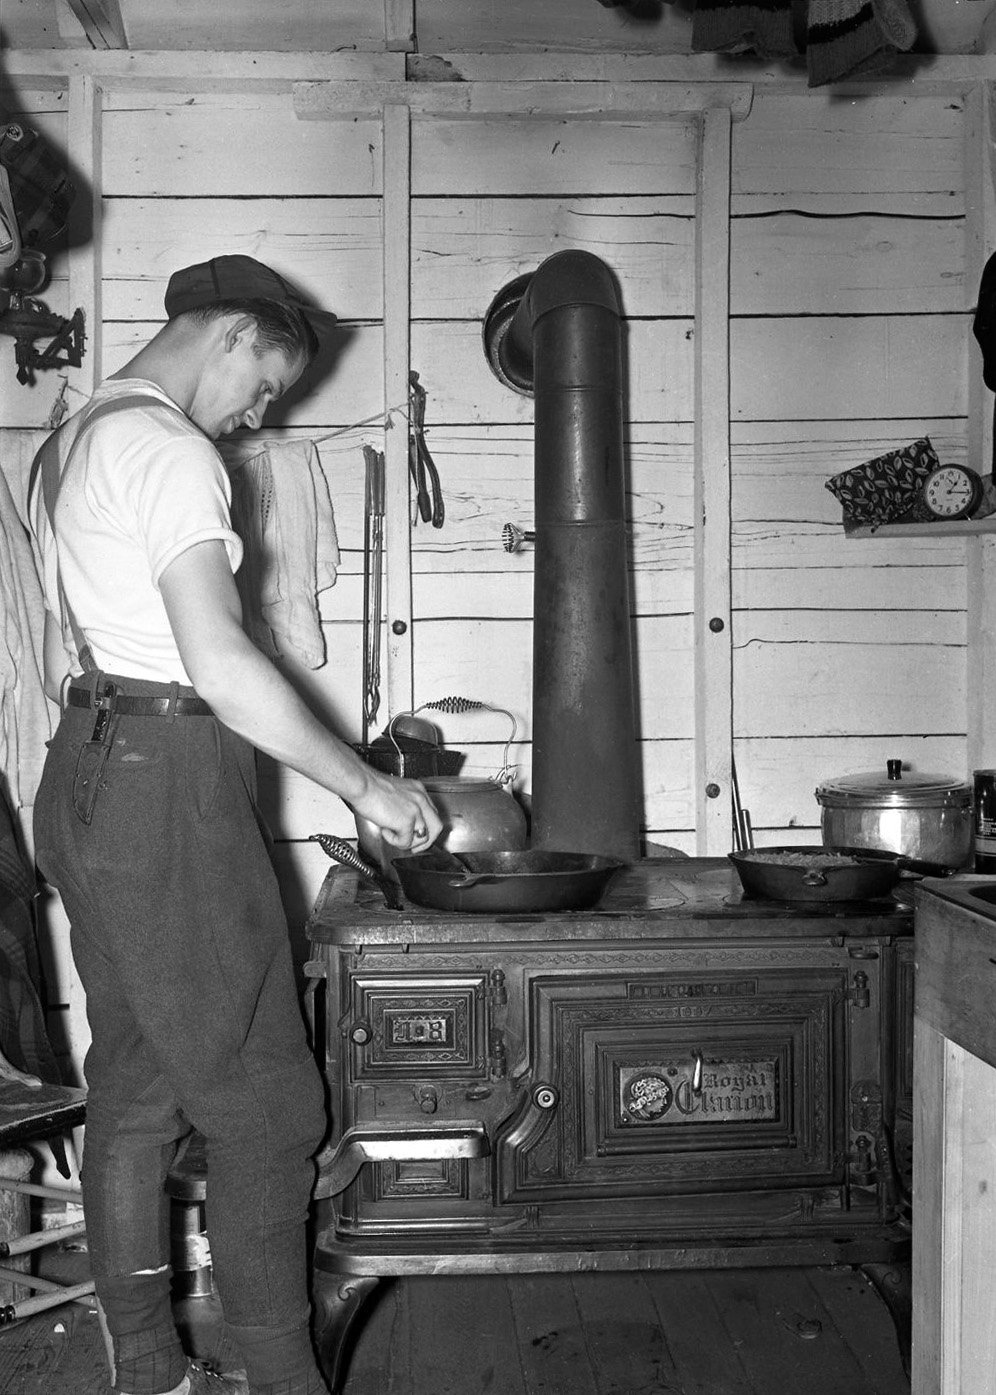 From a series in my negatives collection titled "Hunting Cabin." Can't read the brand of the stove too well, but it dates from 1887. Wonder what he's making? View full size.